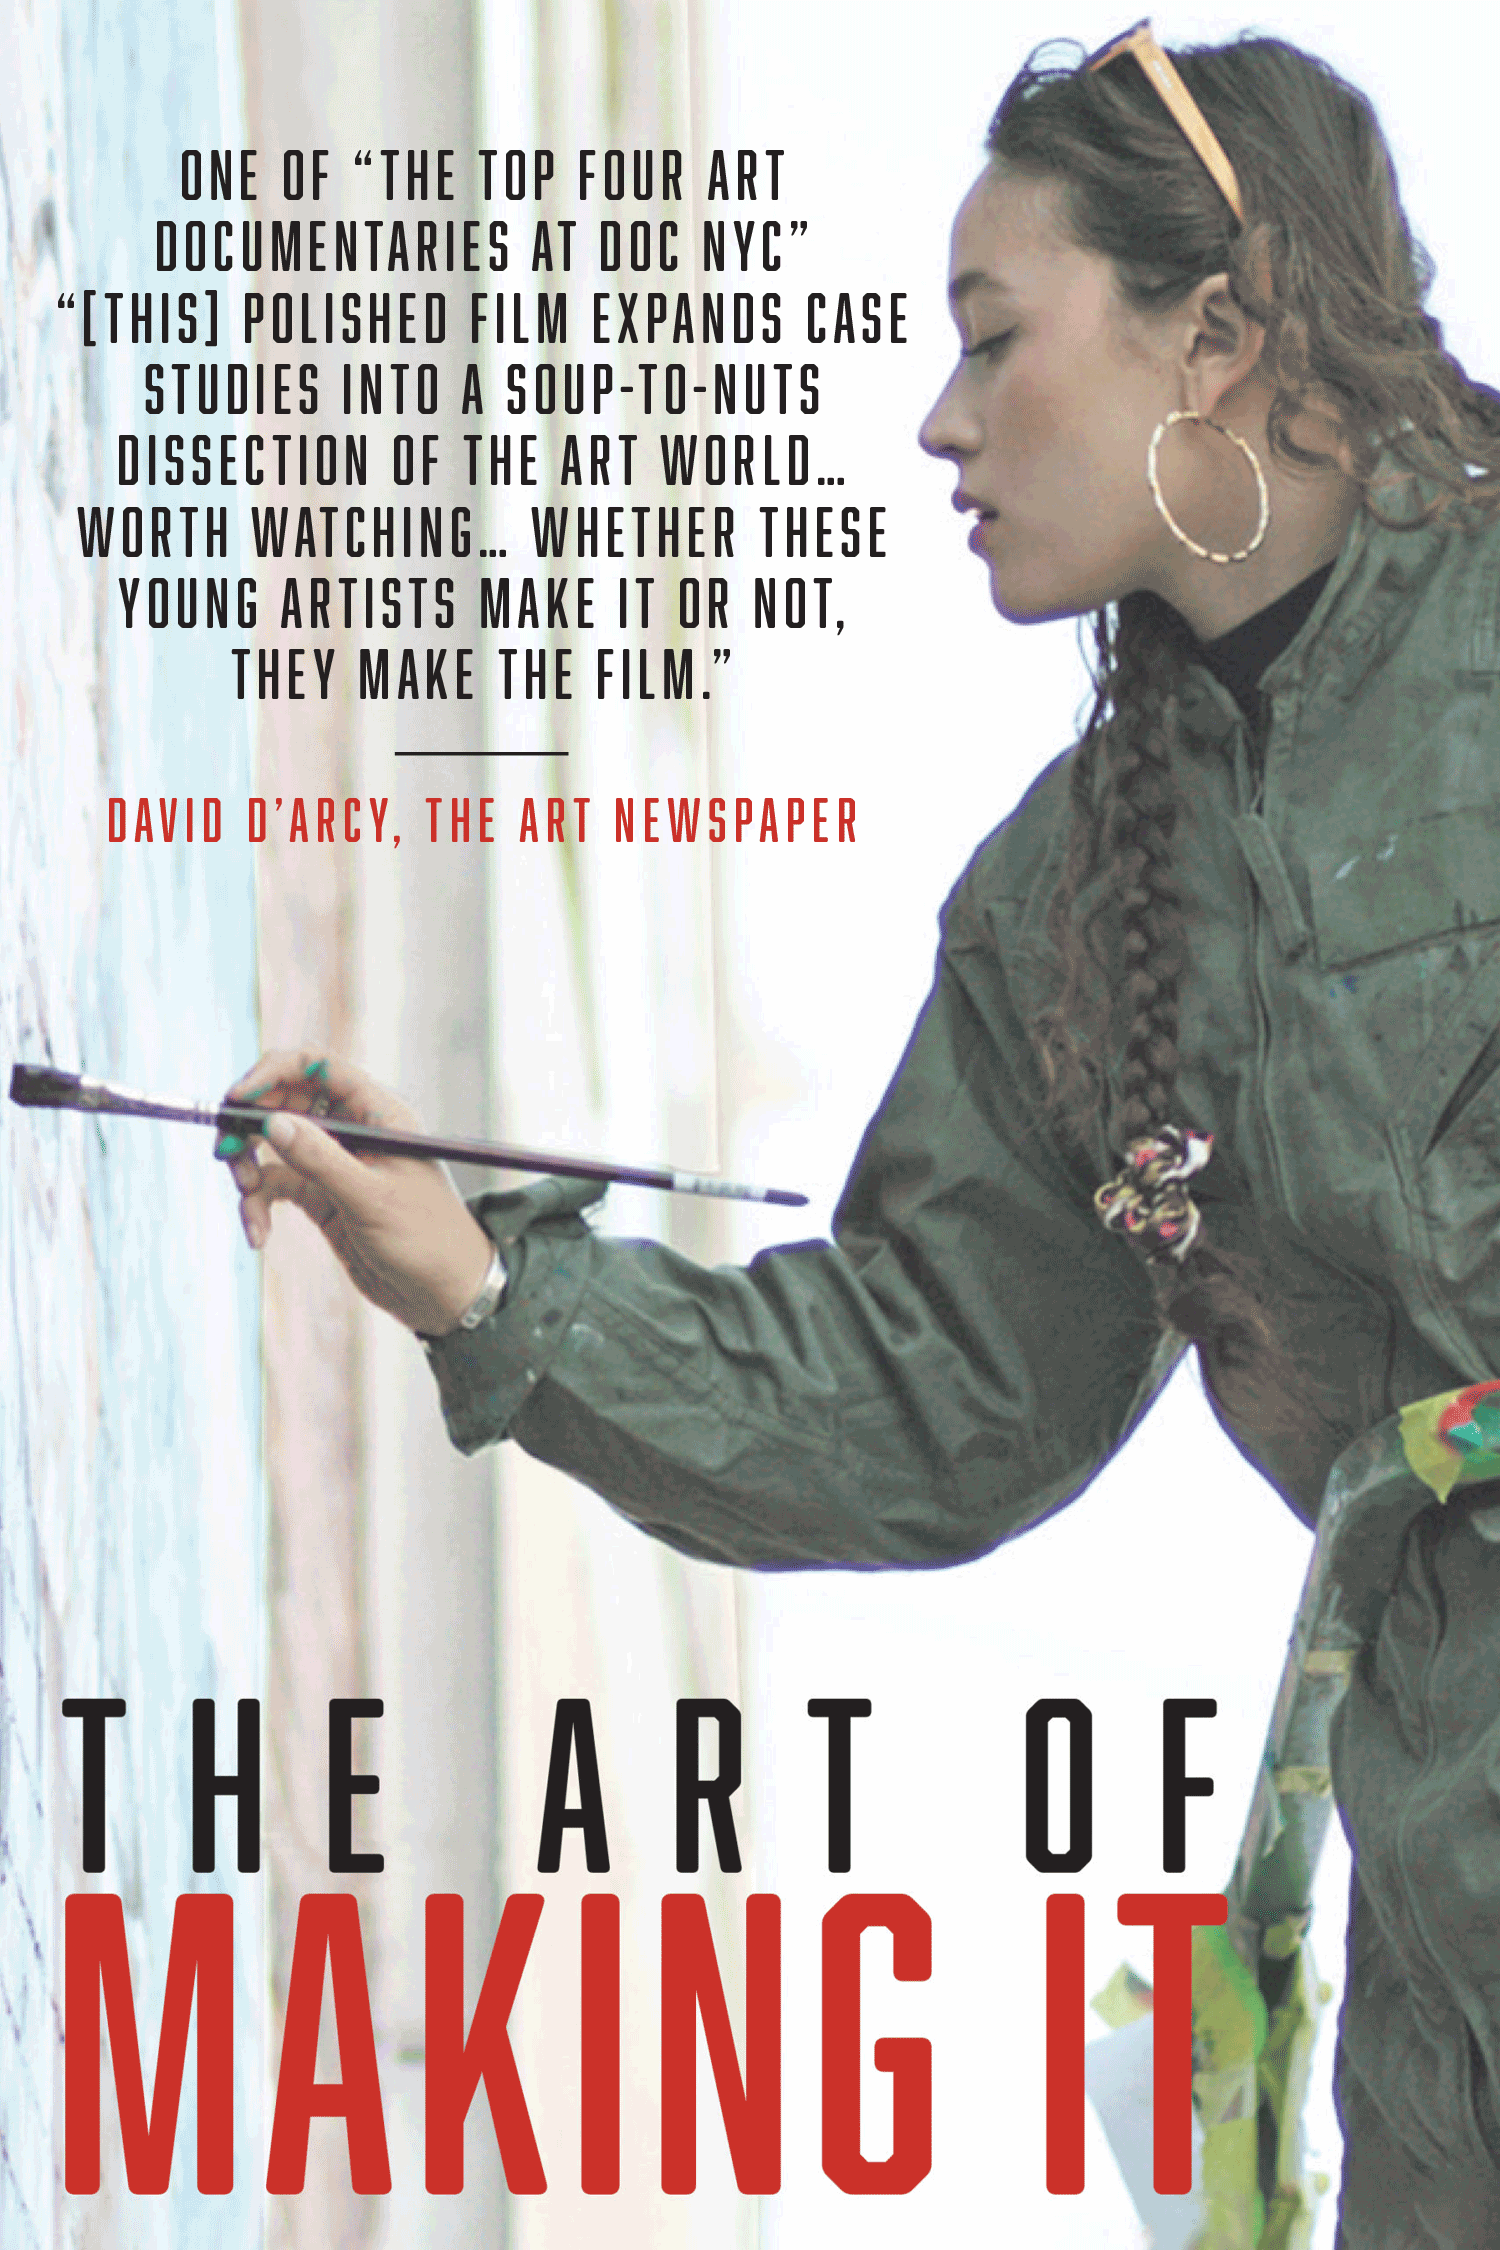 The Art of Making It Documentary Film Poster